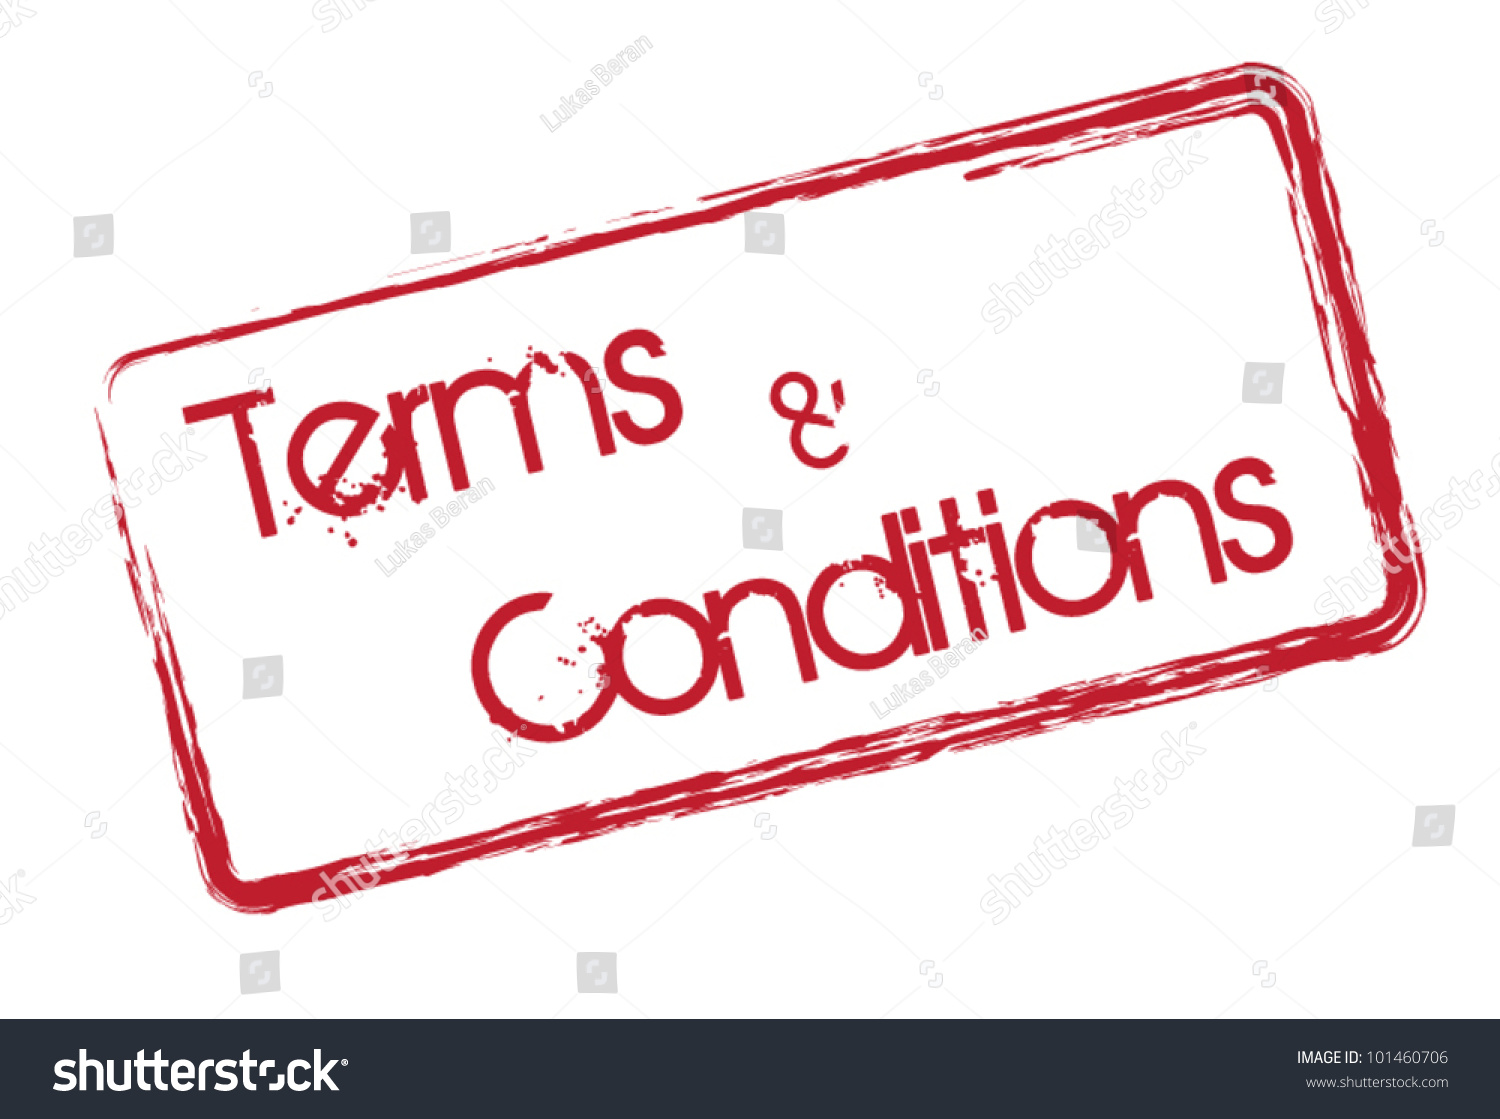 microsoft clipart terms and conditions - photo #1